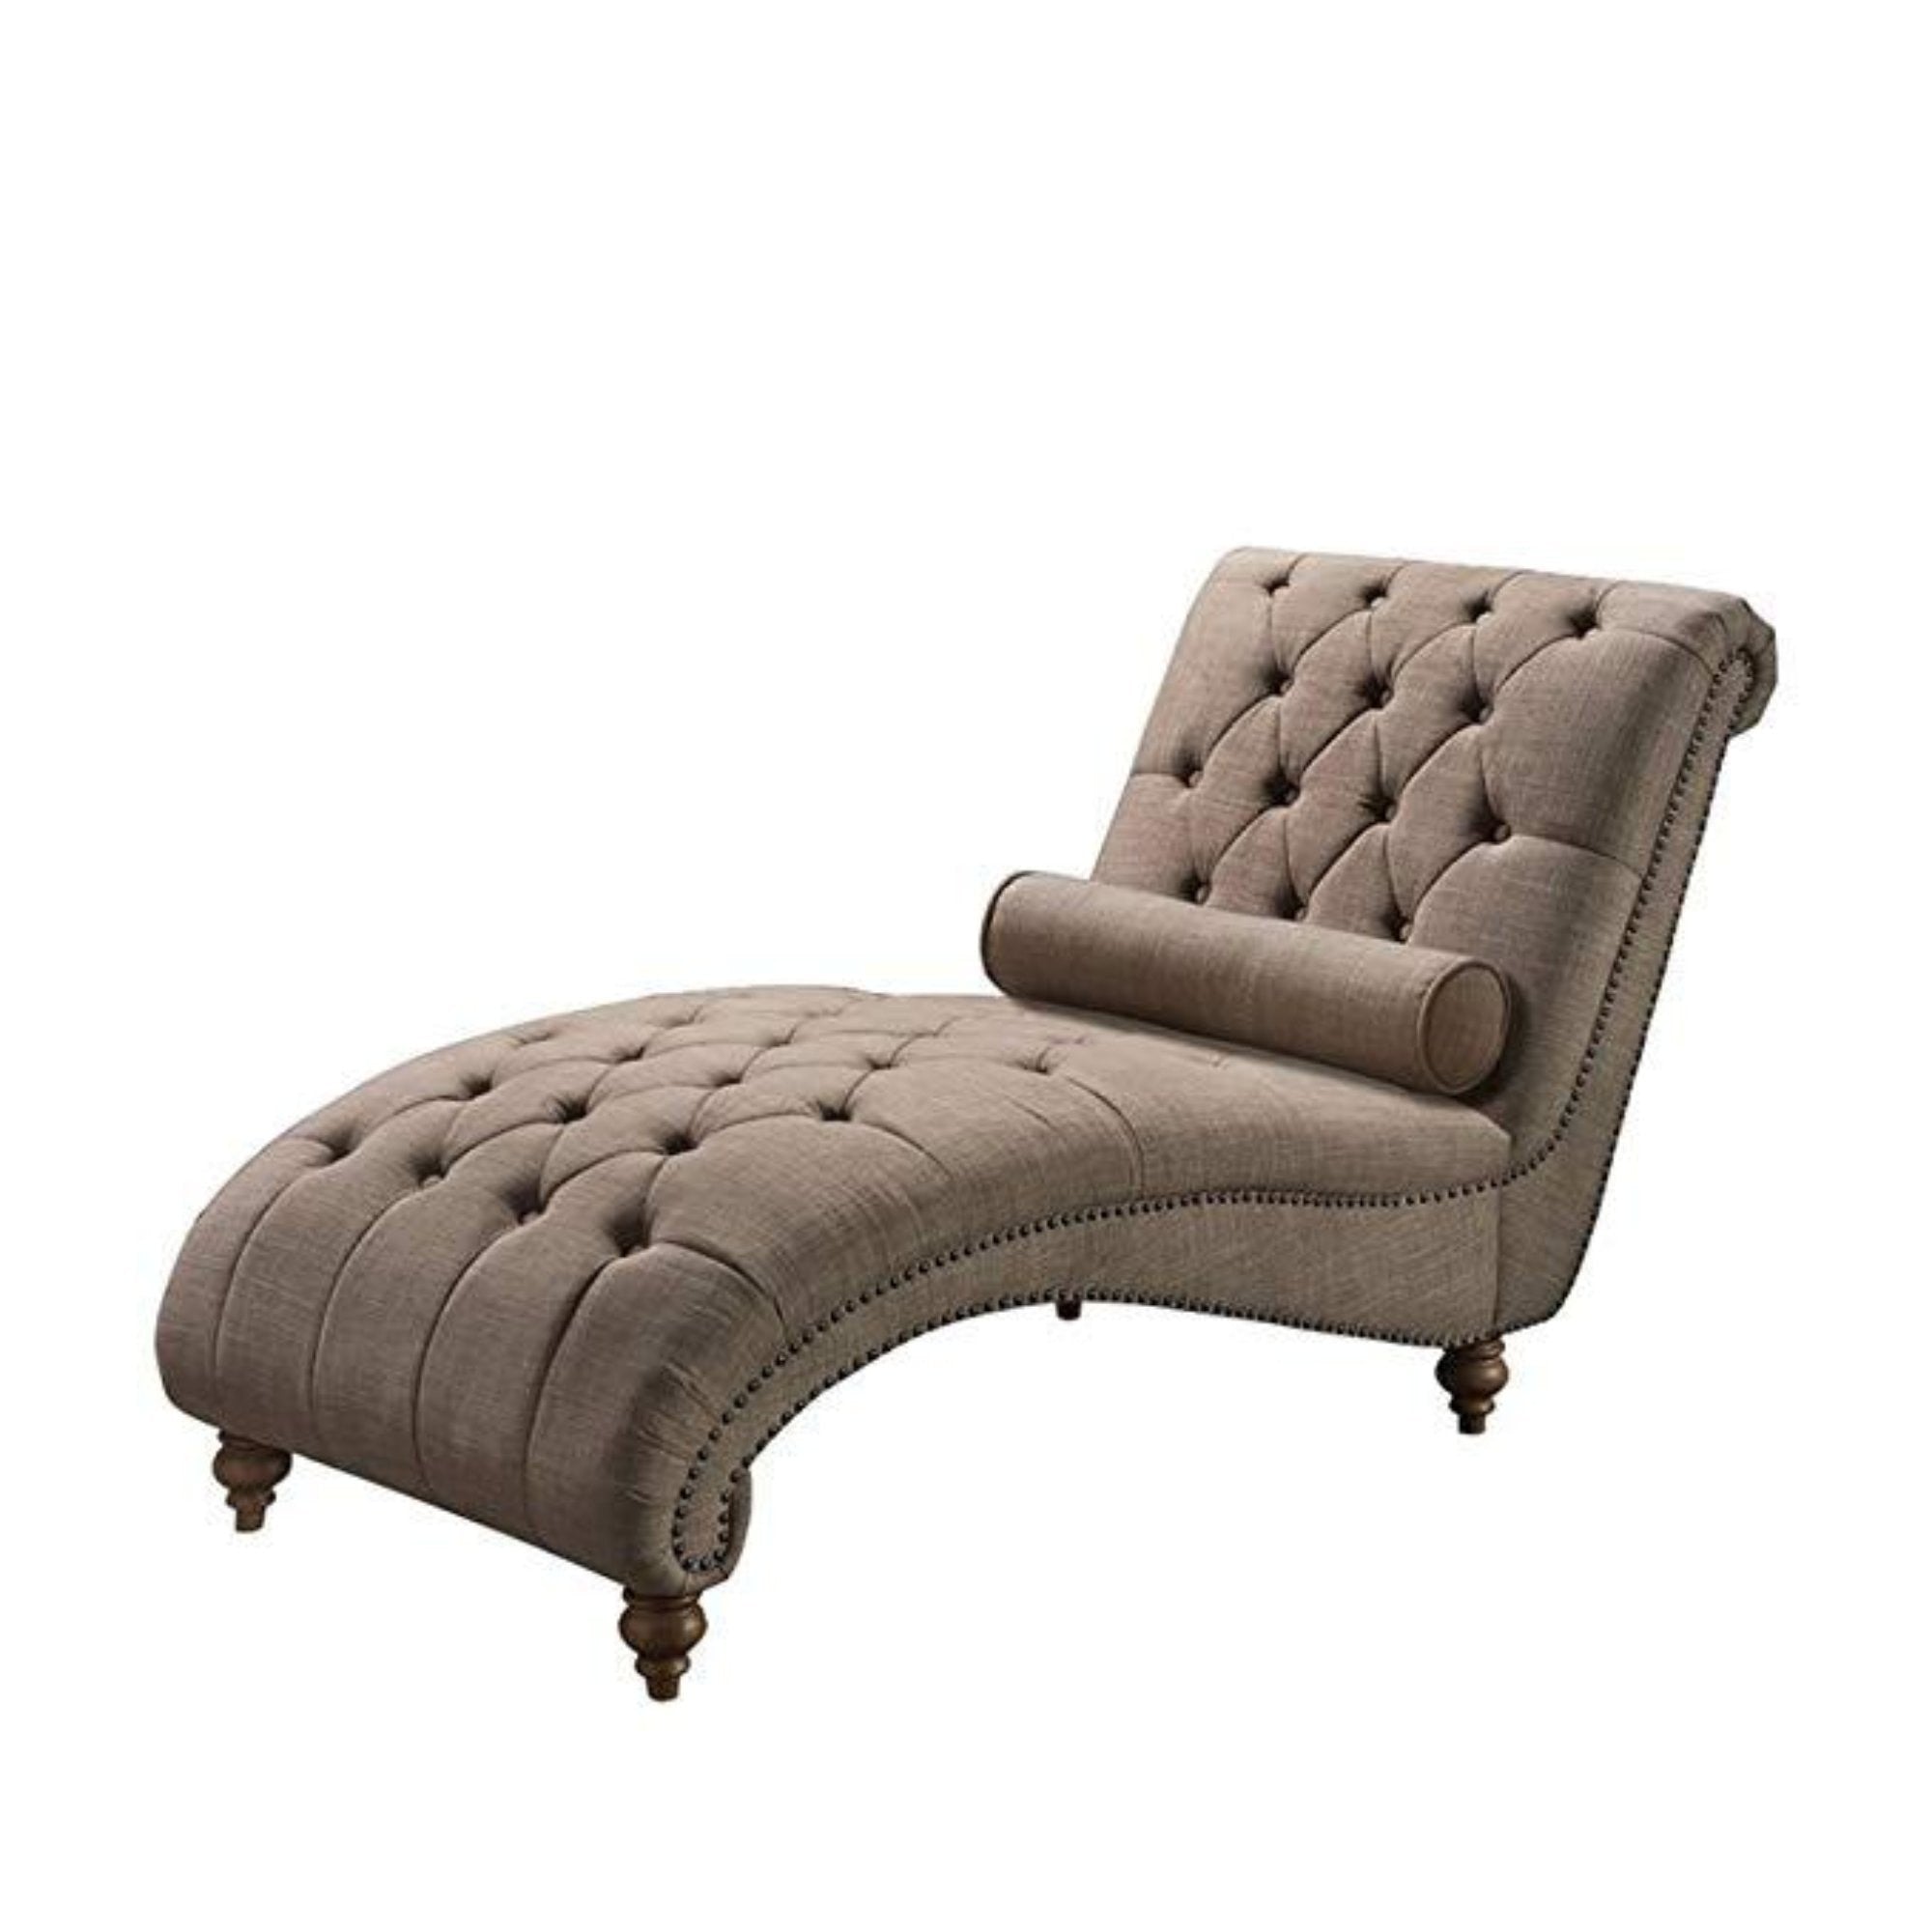 Luxurious Indoor Chaise Lounge Chair with Nailhead Trim and Accent Toss